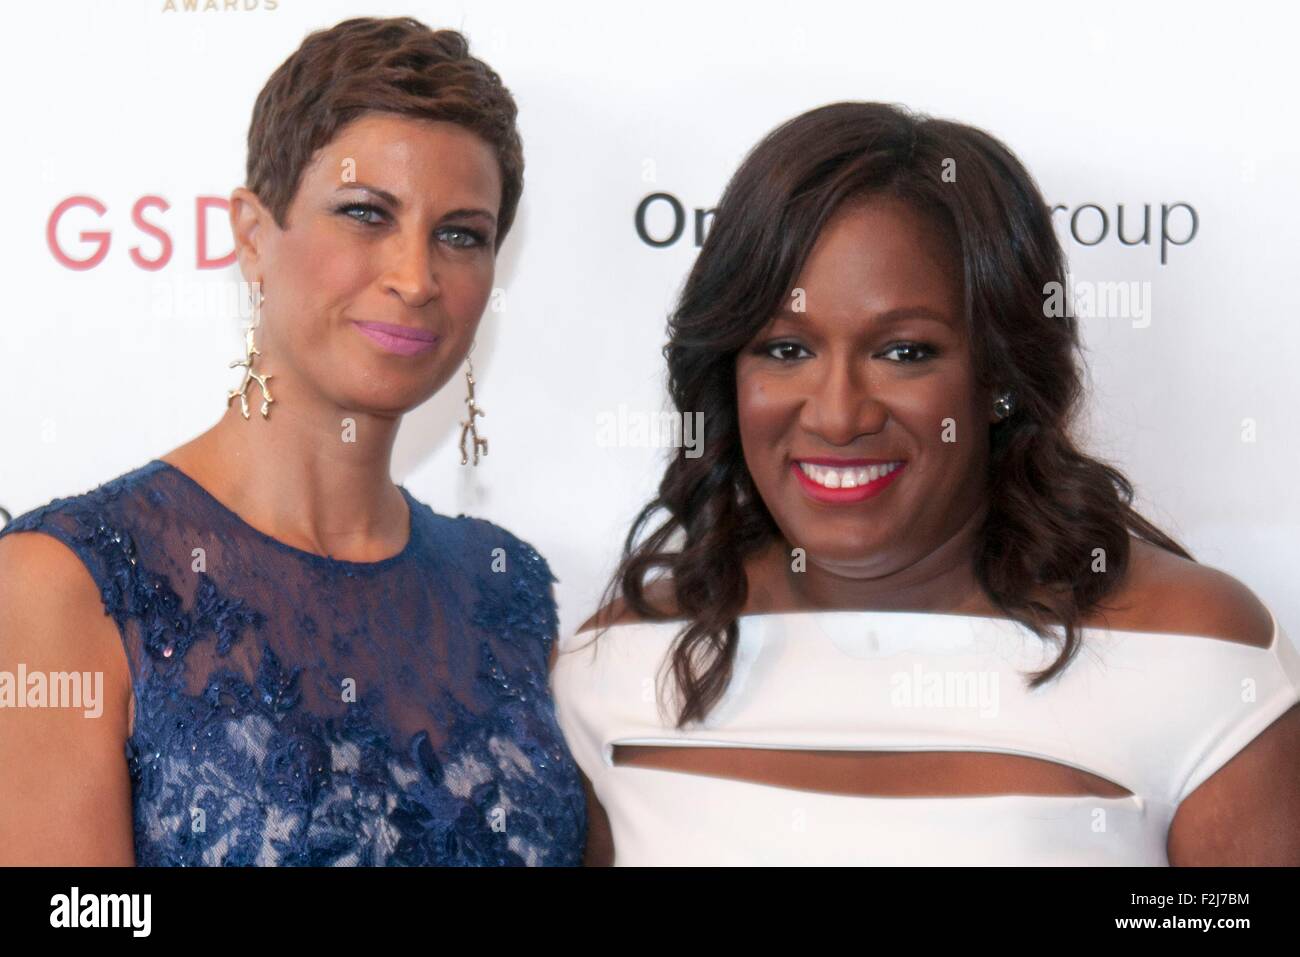 New York, NY, USA. 19th Sep, 2015. Michele Thornton, Tiffany R. Warren at arrivals for The 9th Annual ADCOLOR Awards, Pier Sixty at Chelsea Piers, New York, NY September 19, 2015. Credit:  Patrick Cashin/Everett Collection/Alamy Live News Stock Photo